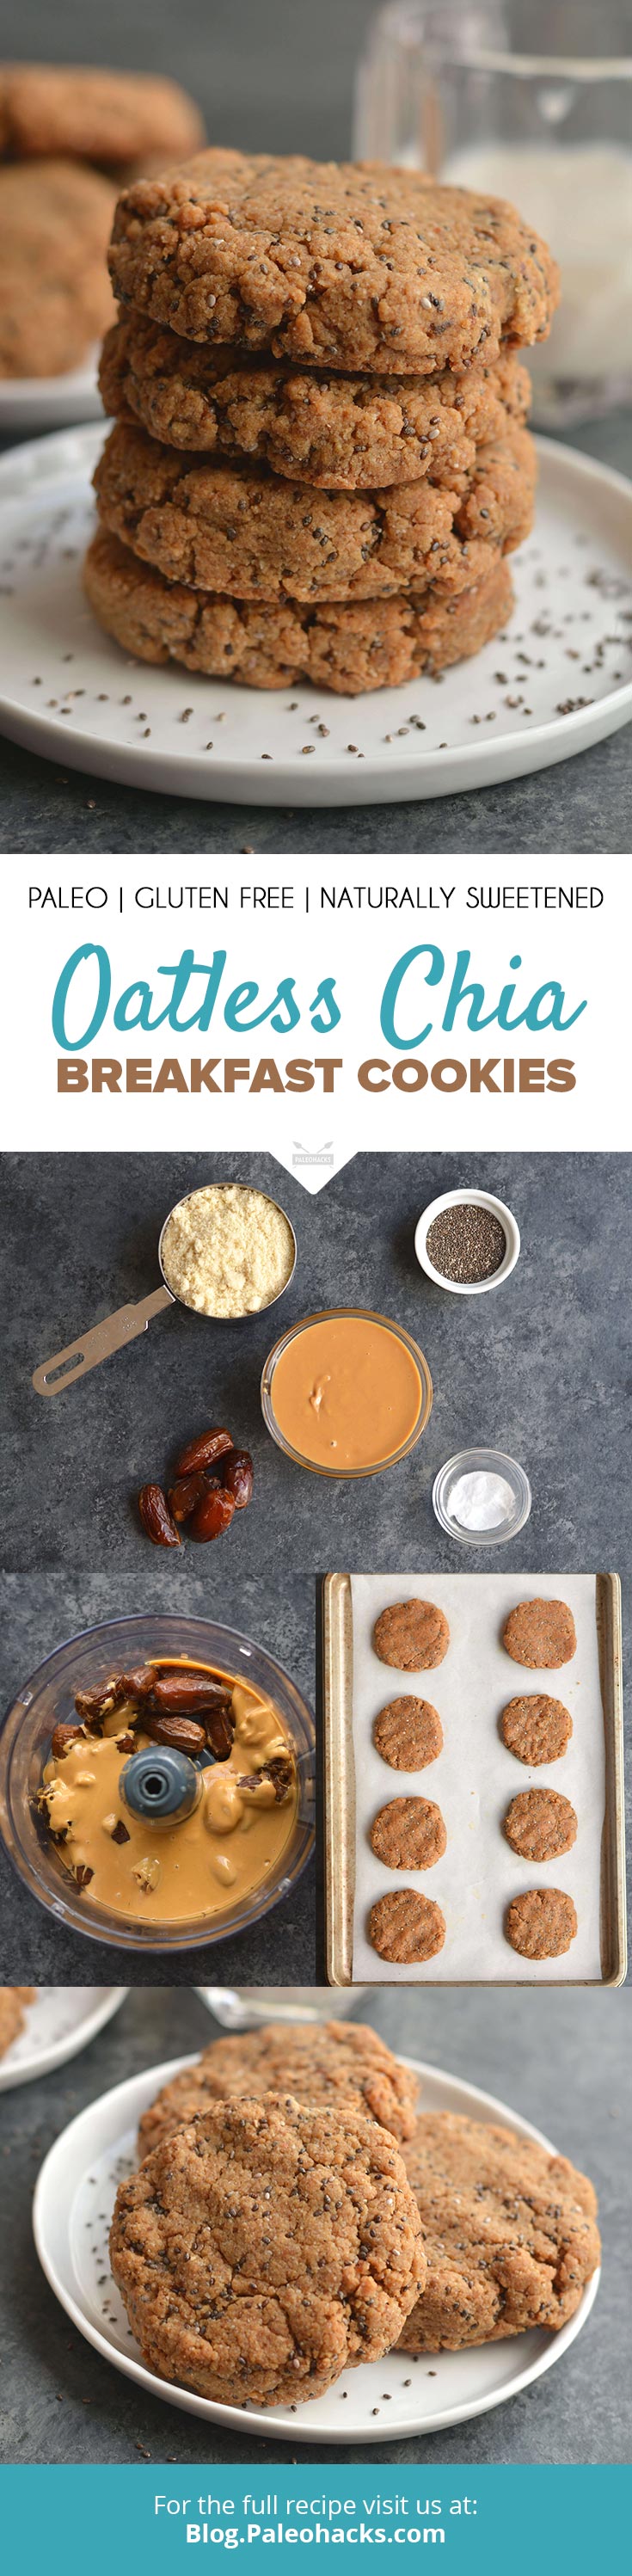 These 5-ingredient chia breakfast cookies are loaded with all kinds of goodies to fuel your morning. They're high in fiber and full of healthy fat!